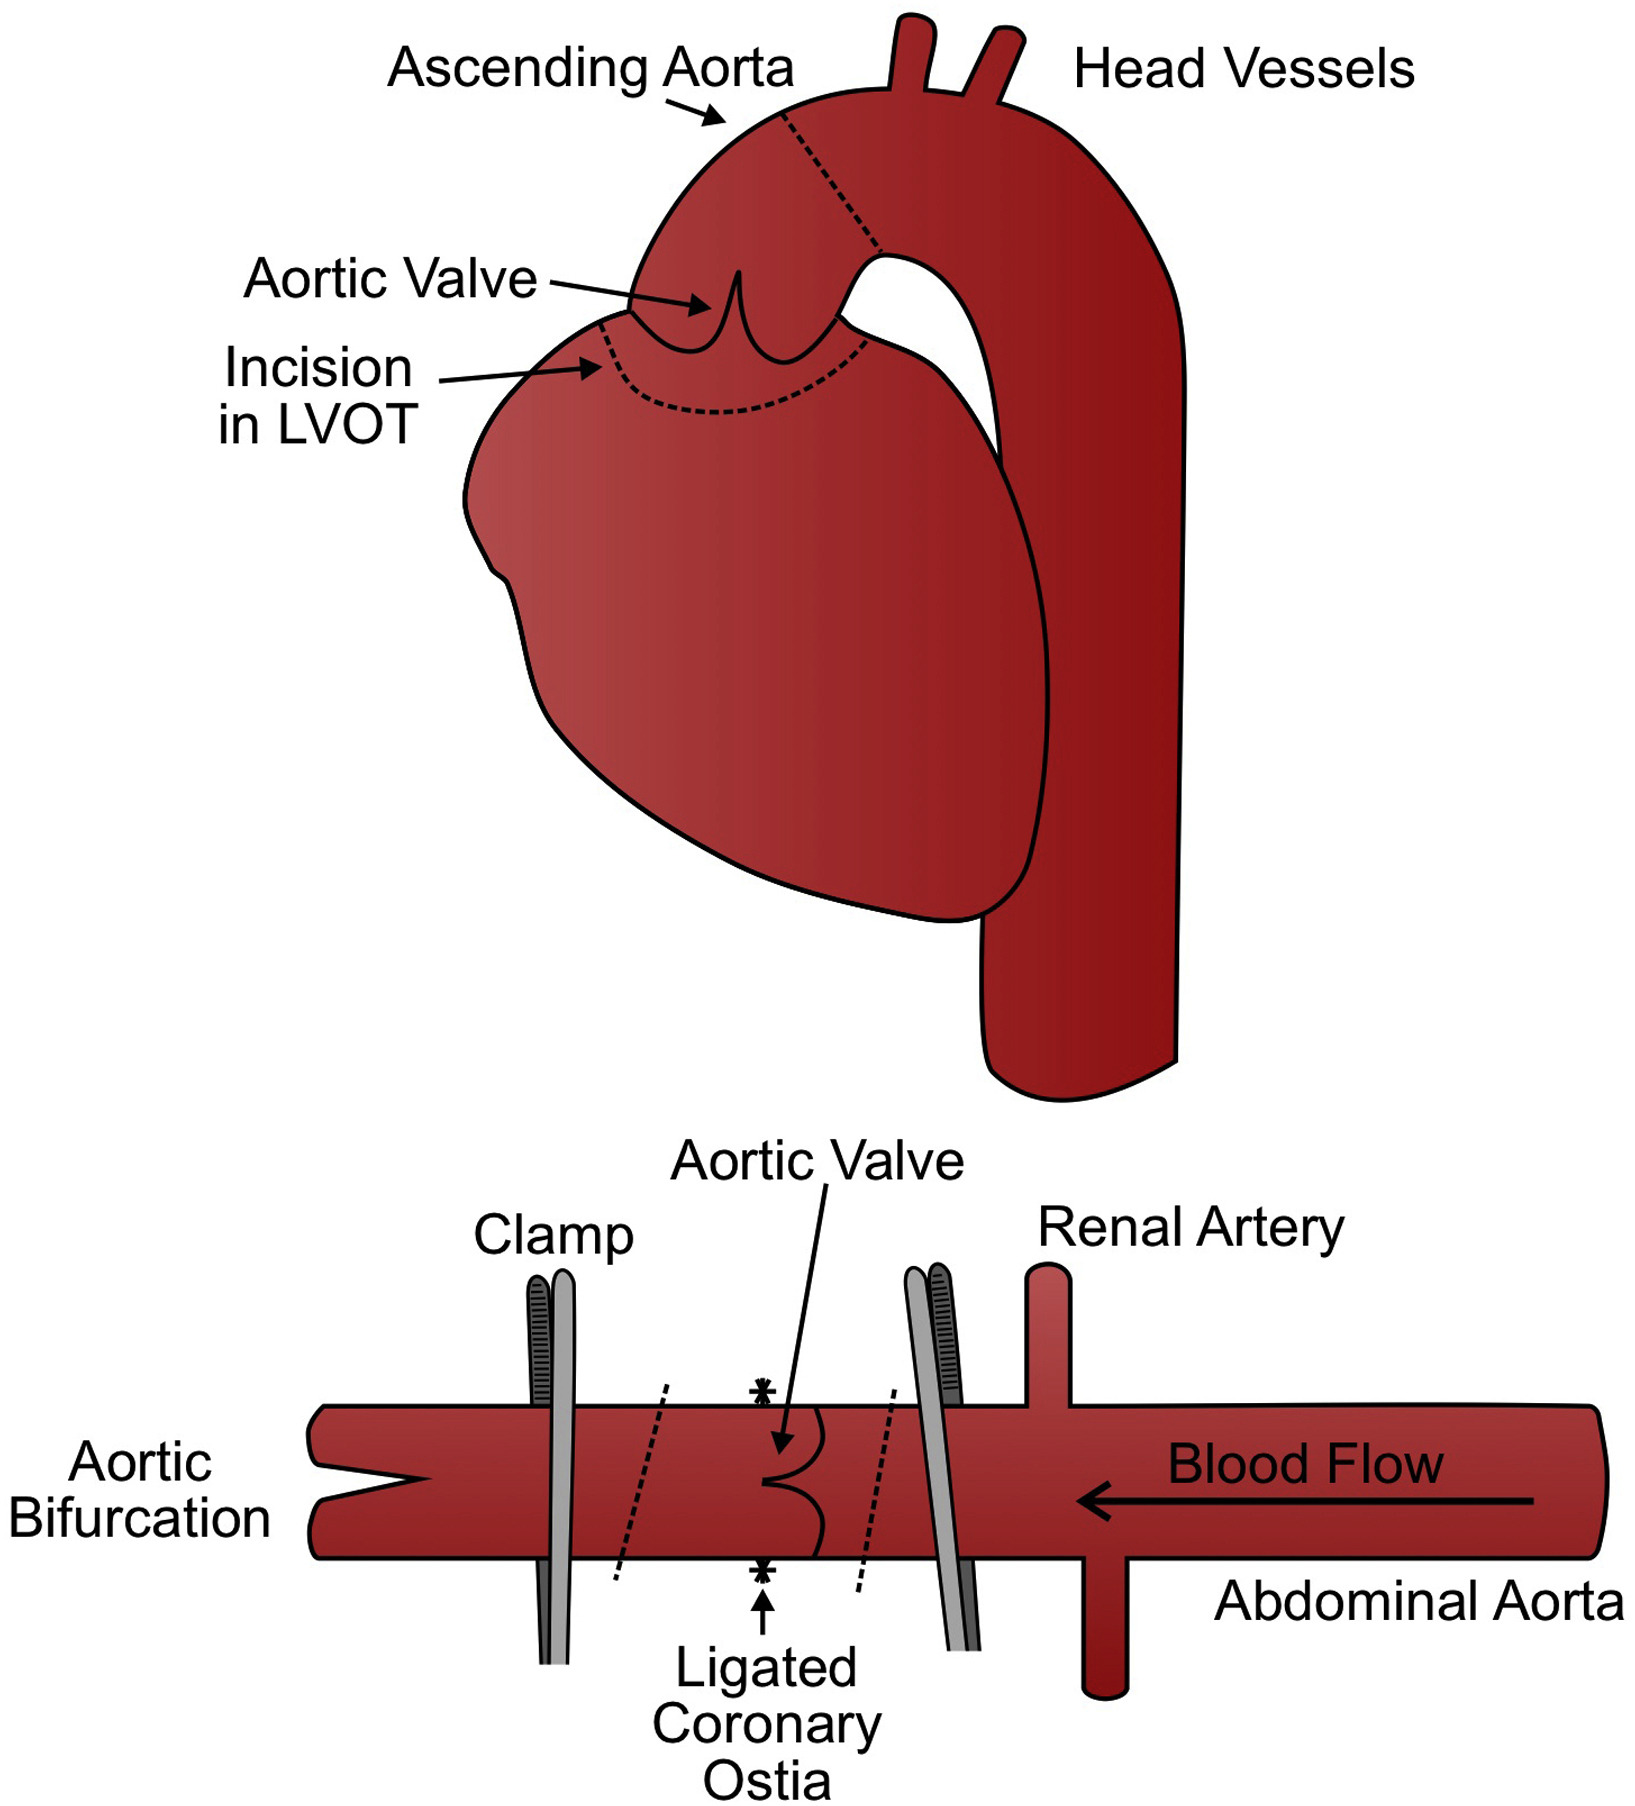 Anticoagulation Machine, aortic valve replacement, Aortic valve stenosis, artificial heart valve, benefits of self testing, bioprosthetic valve replacement, Blood Clot, cusps (tricuspid aortic valve), embolism, heart bypass, Heart failure, Heart Valve Disease, heart valve replacement, home inr, home inr testing, inr machine, inr self testing, inr test meters at home, leaky heart valve, Mechanical Heart Valve, mitral incompetence, mitral insufficiency, Mitral valve regurgitation, On-X Aortic Valve, Patient Self Testing, prosthetic heart valves, pt inr cpt code, pt inr home monitoring system, pt inr machine, pt inr test meter, PT/INR Patient Self Testing, Stroke, warfarin inr test meters